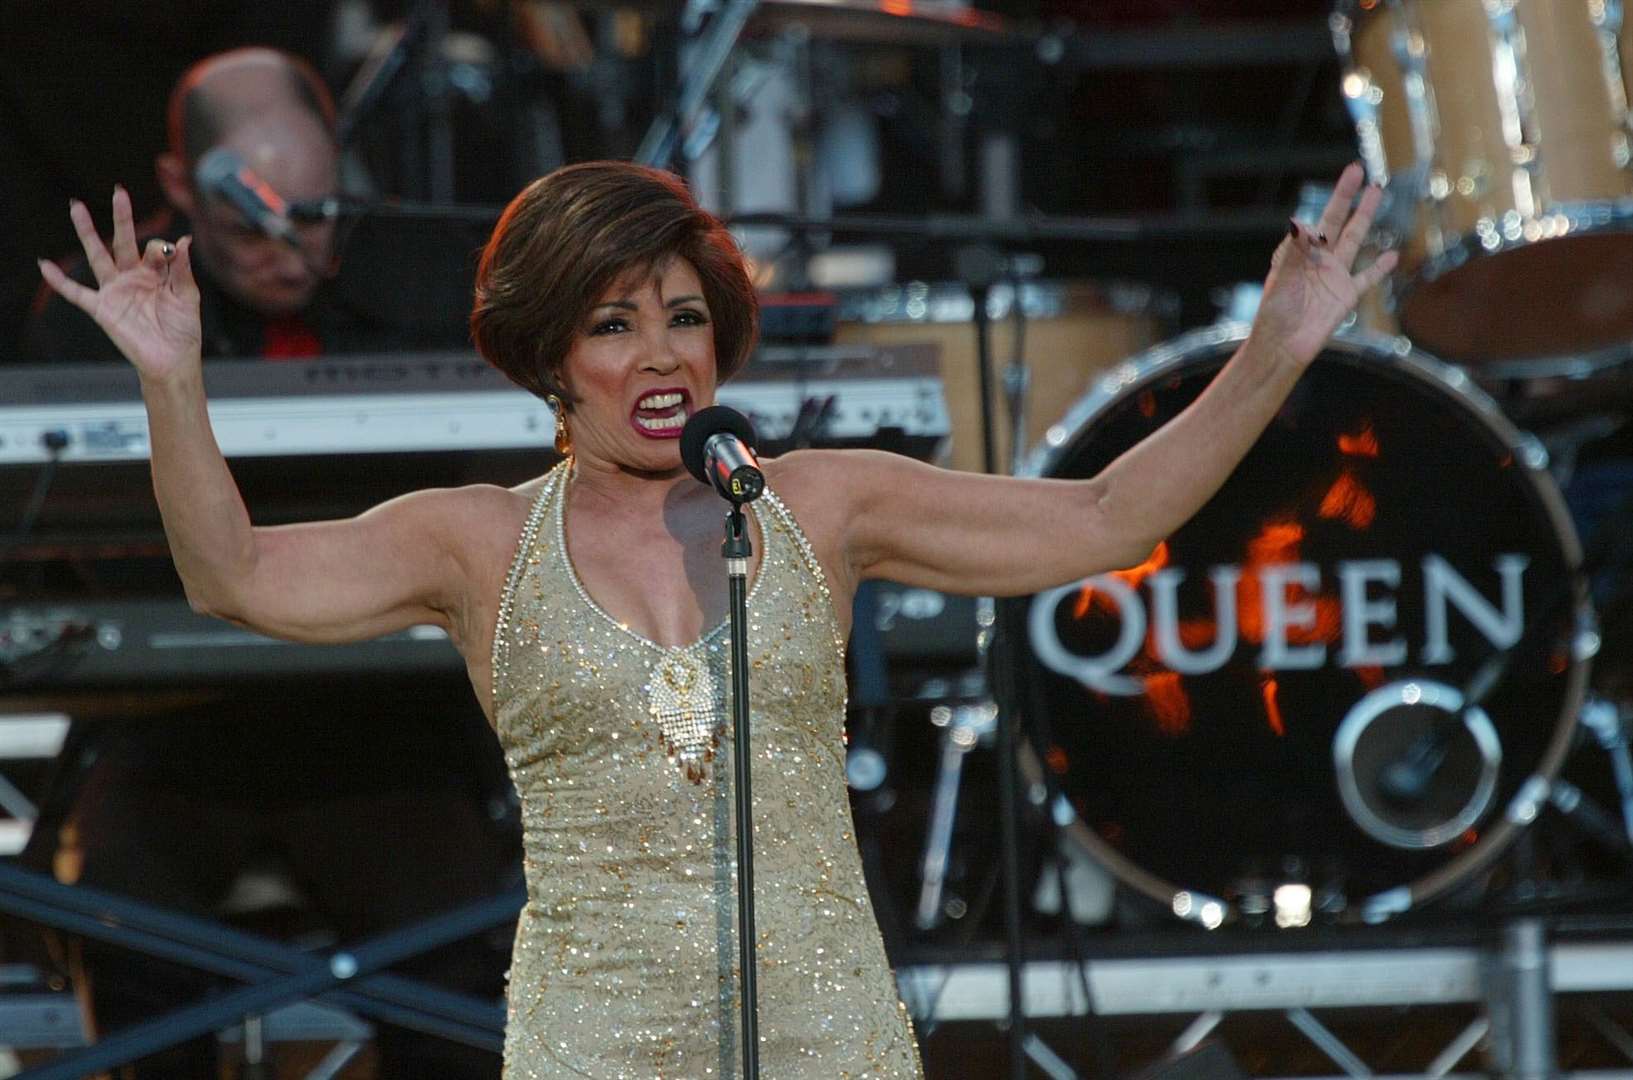 Dame Shirley Bassey performed at the Golden Jubilee pop concert in the gardens of Buckingham Palace in London in 2002. Picture: Reuters.